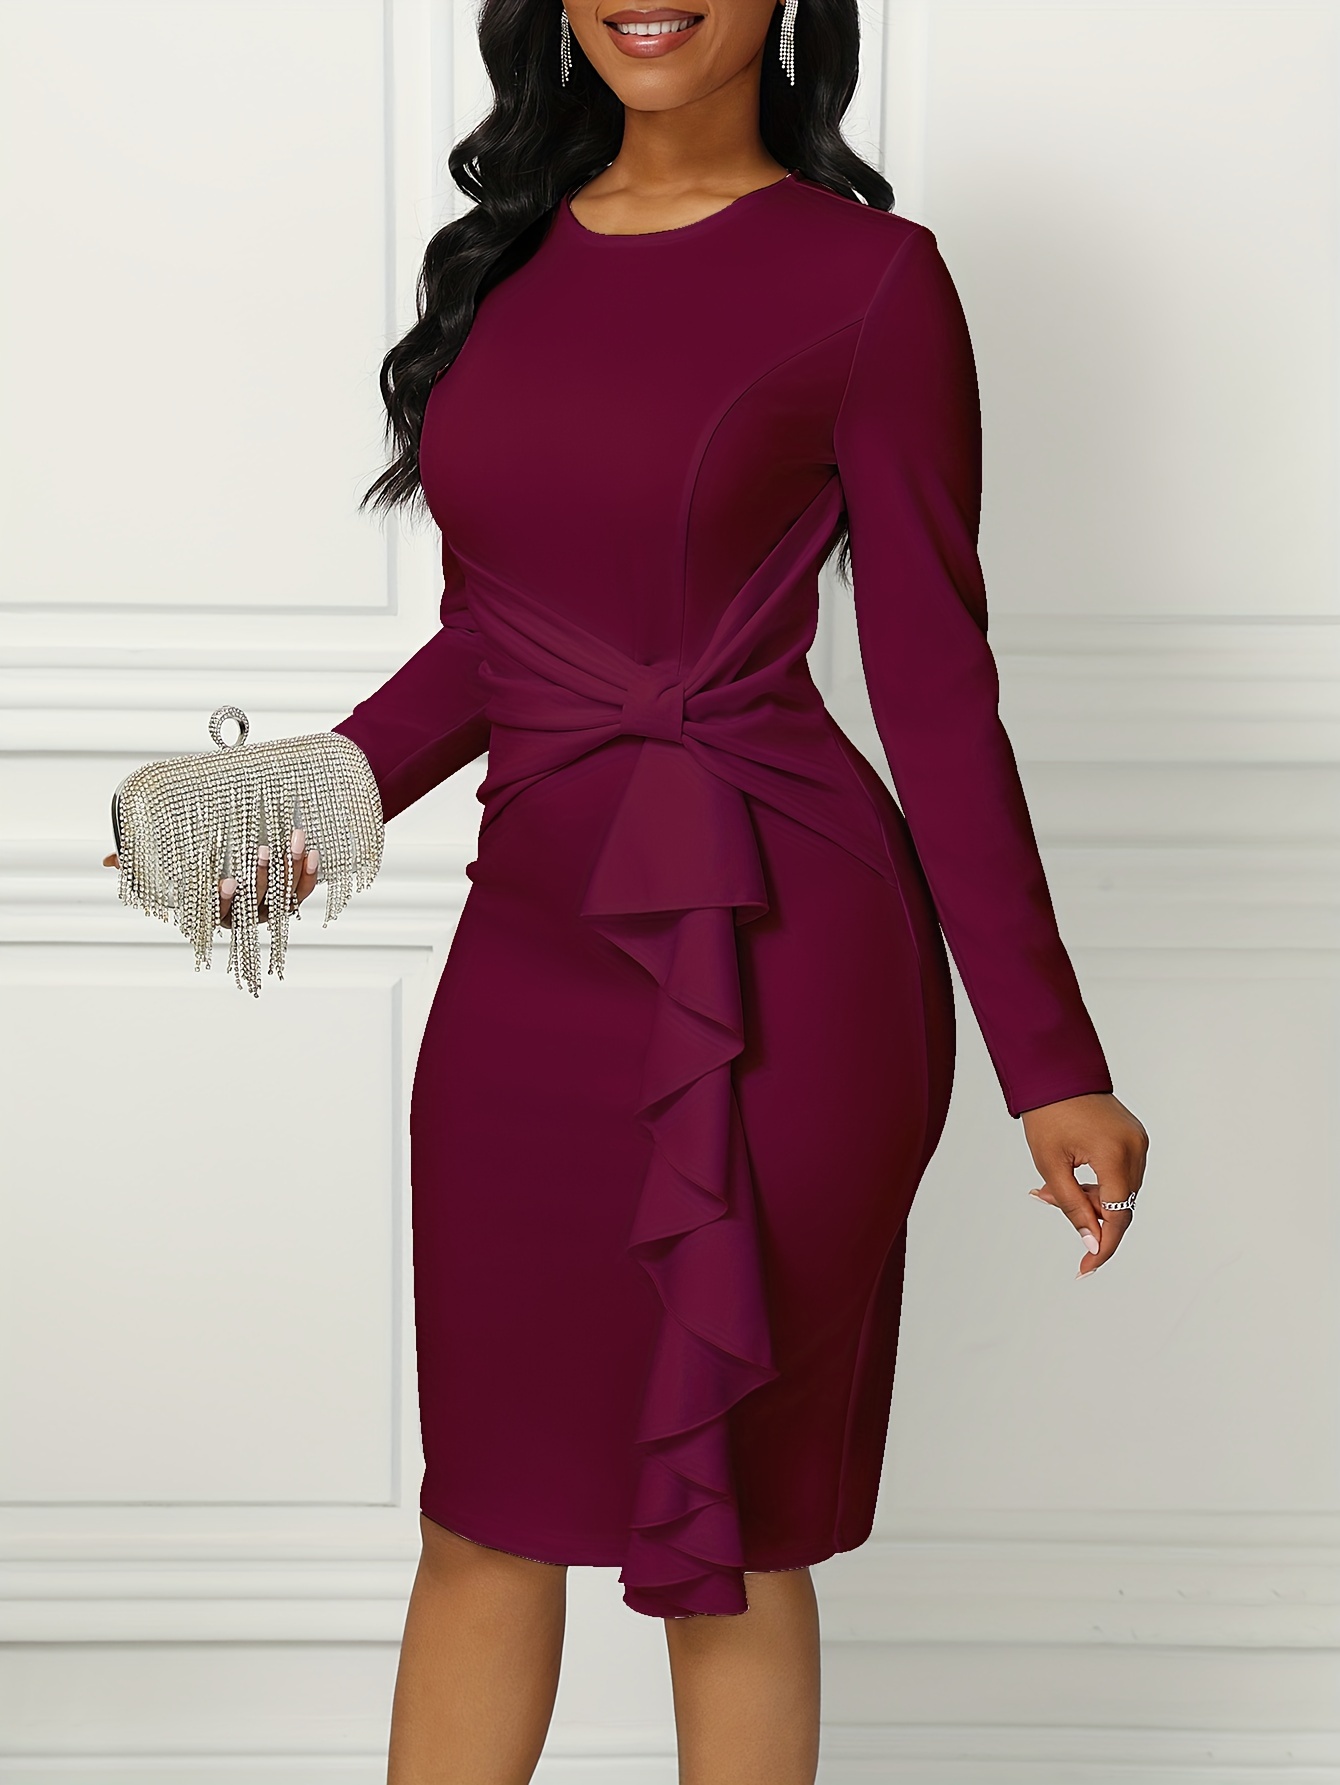  Dresses for Women - Ruffle Trim Belted Bodycon Dress